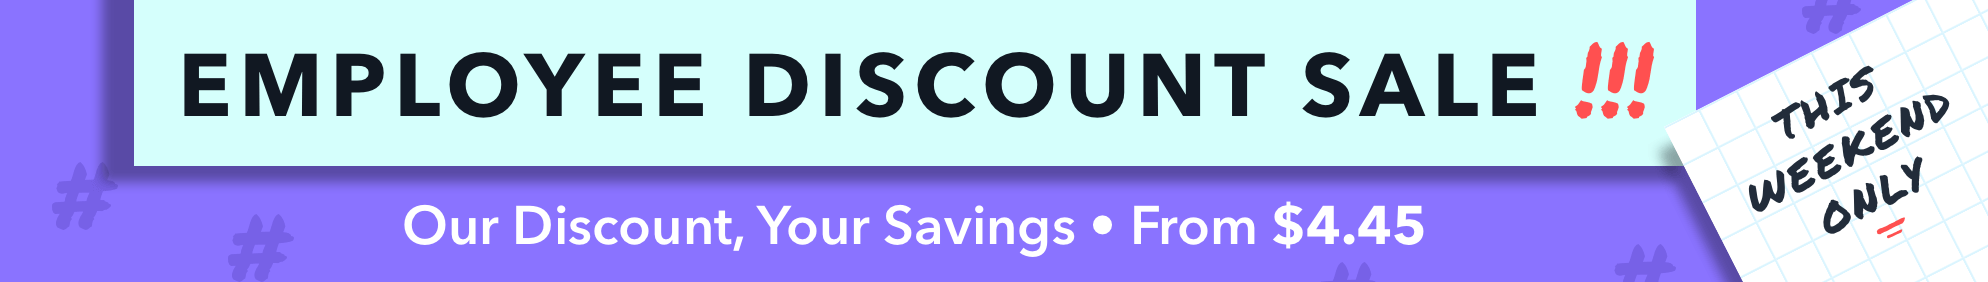 the-employee-discount-subscription-sale-frugal-living-nw